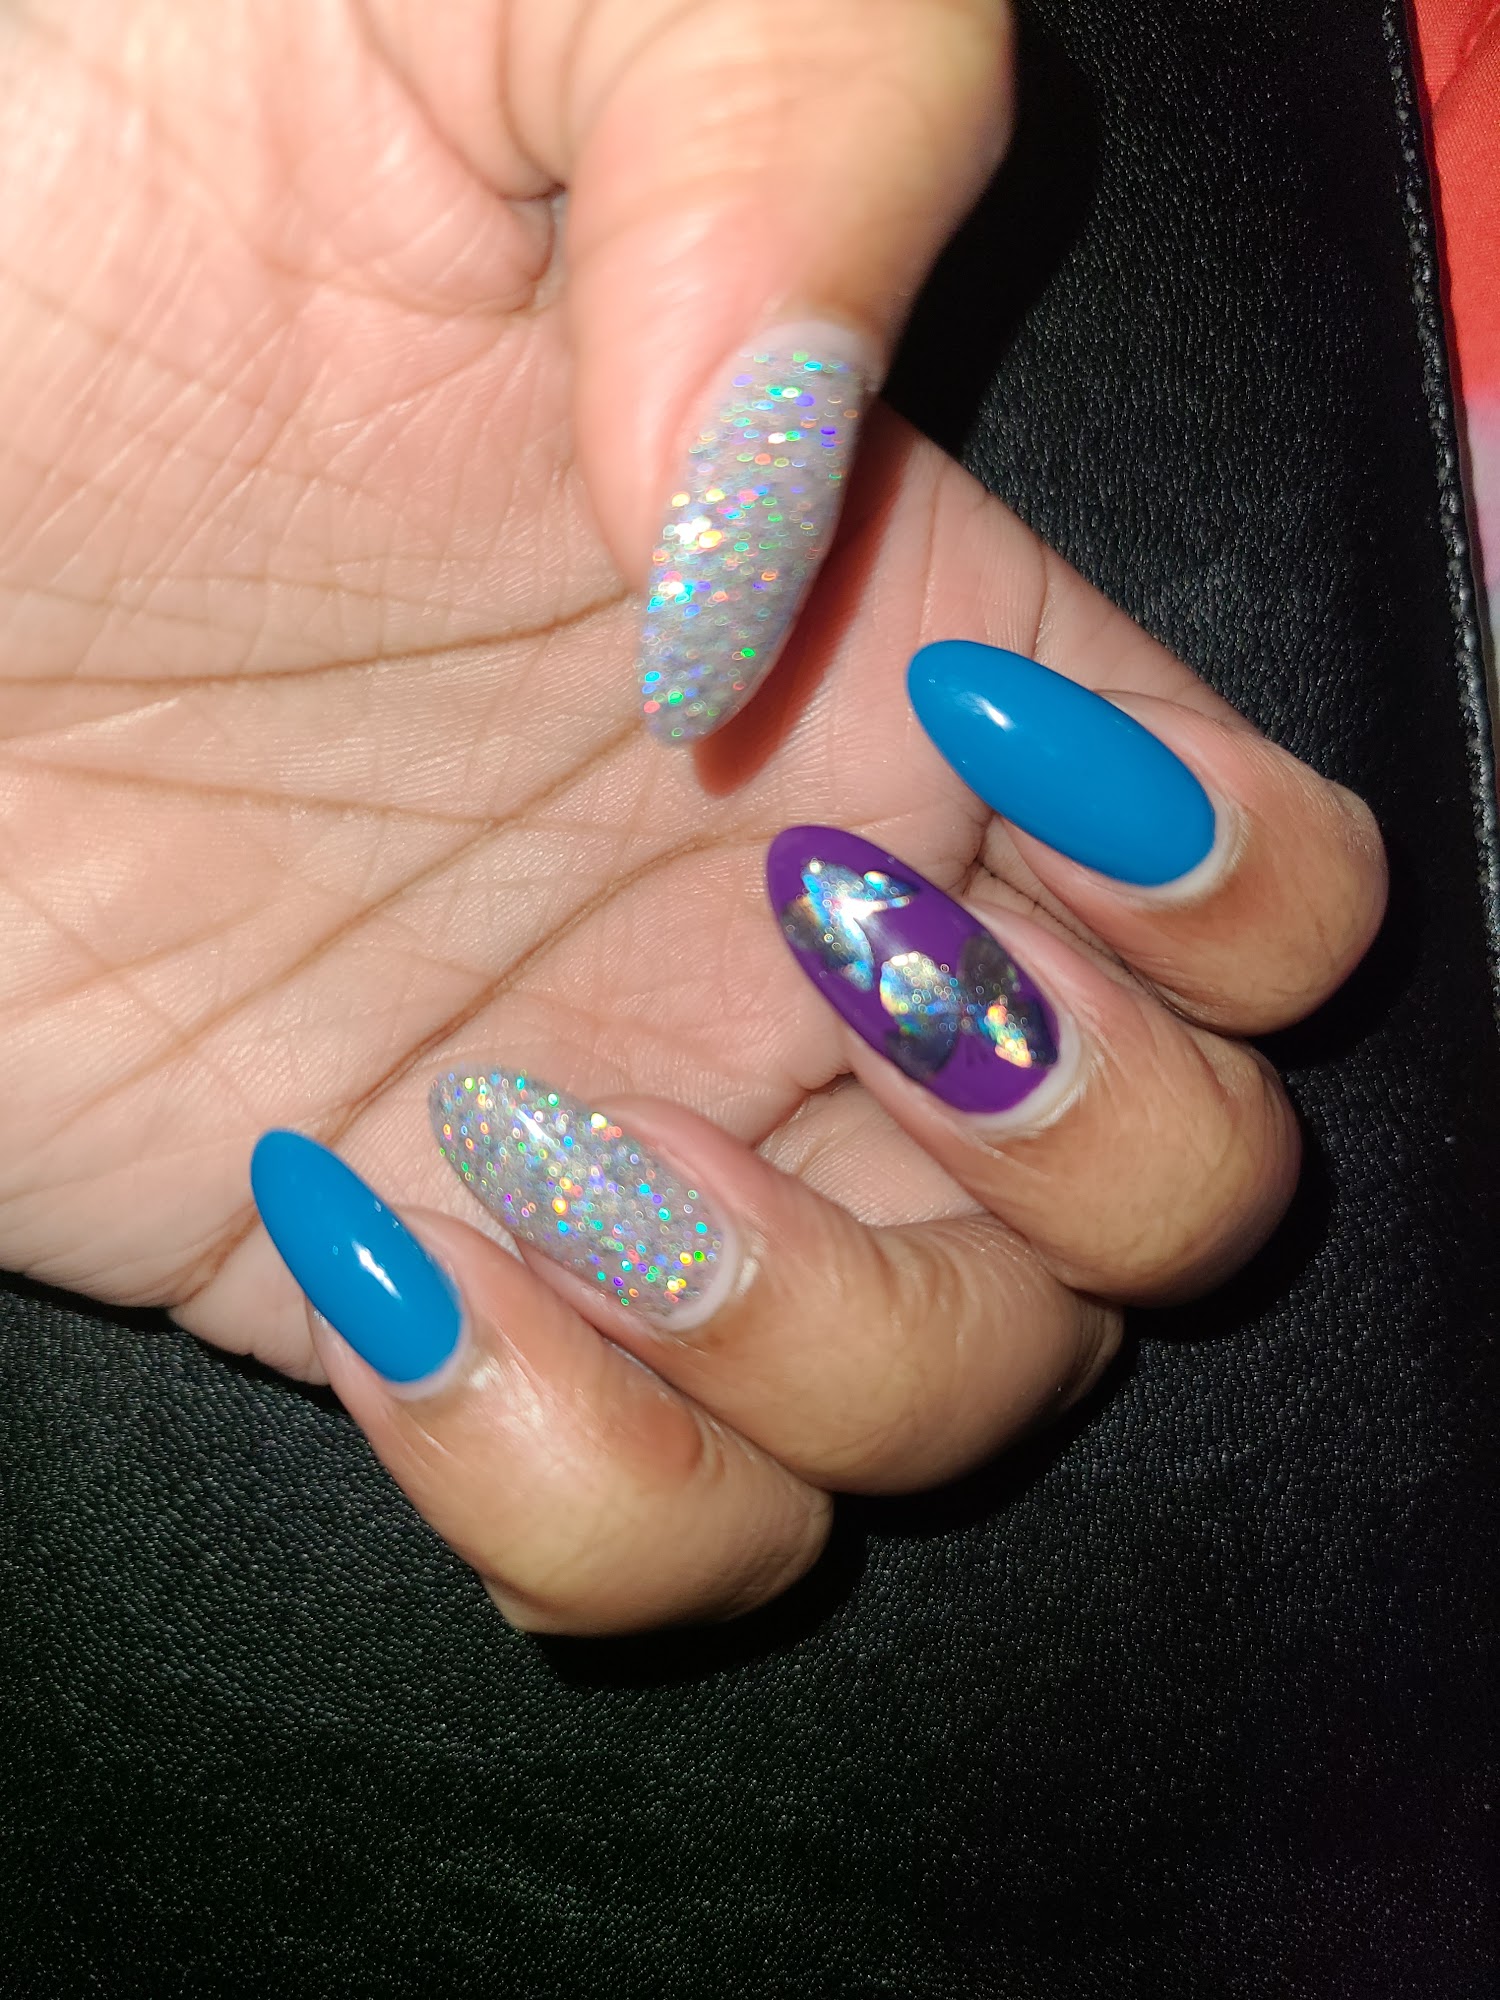 Luv Nails and SPA 305 E Evesham Rd, Runnemede New Jersey 08078